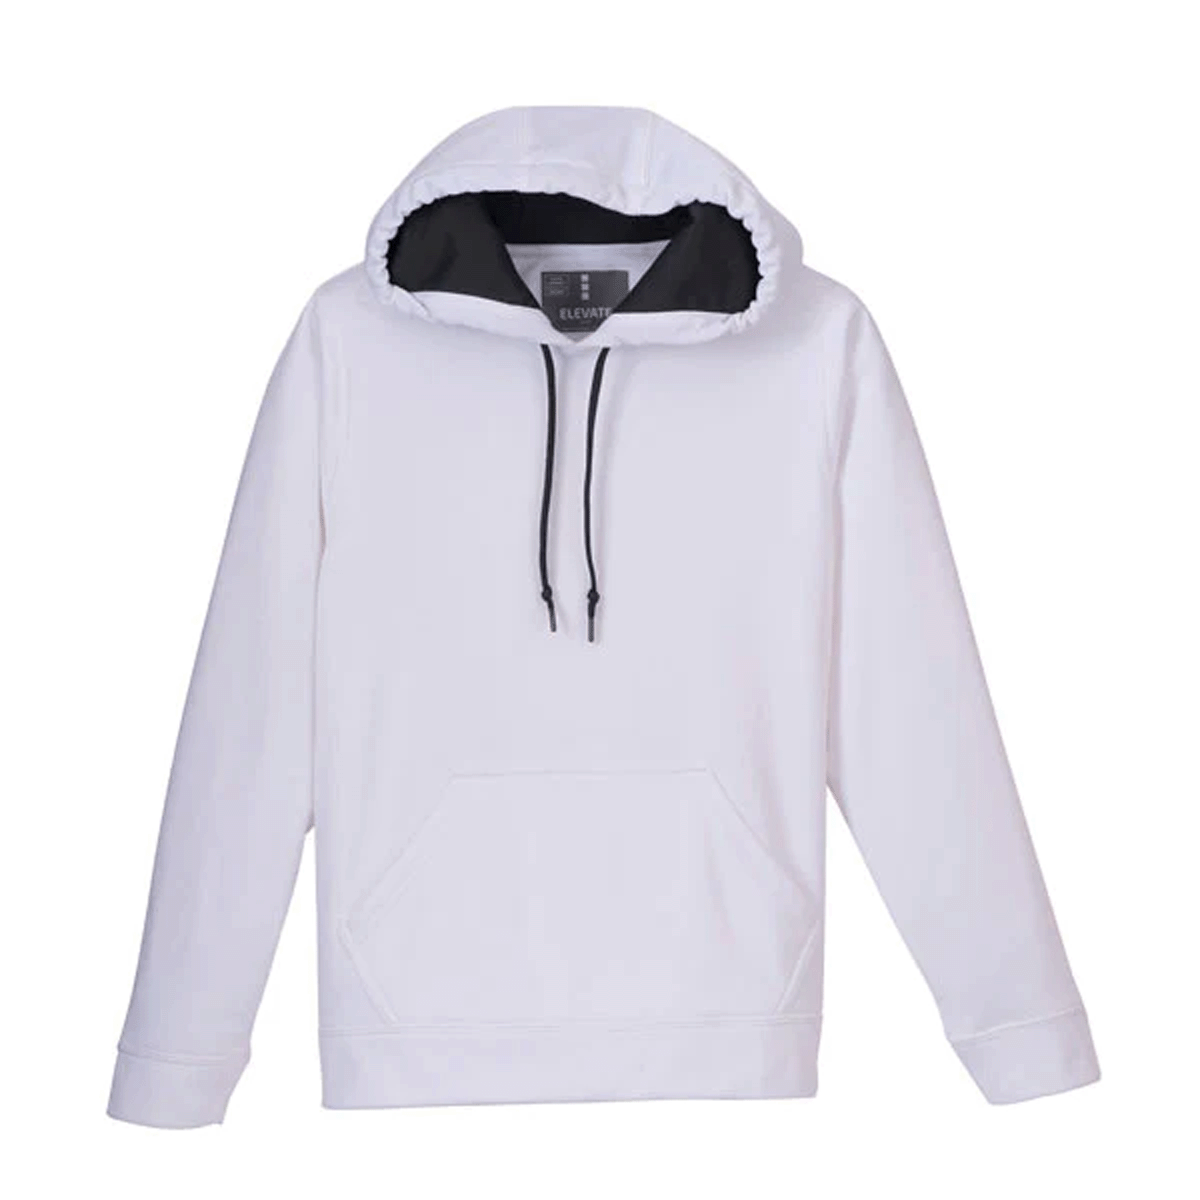 TRIMARK YOUTH PASCO TECH HOODIE